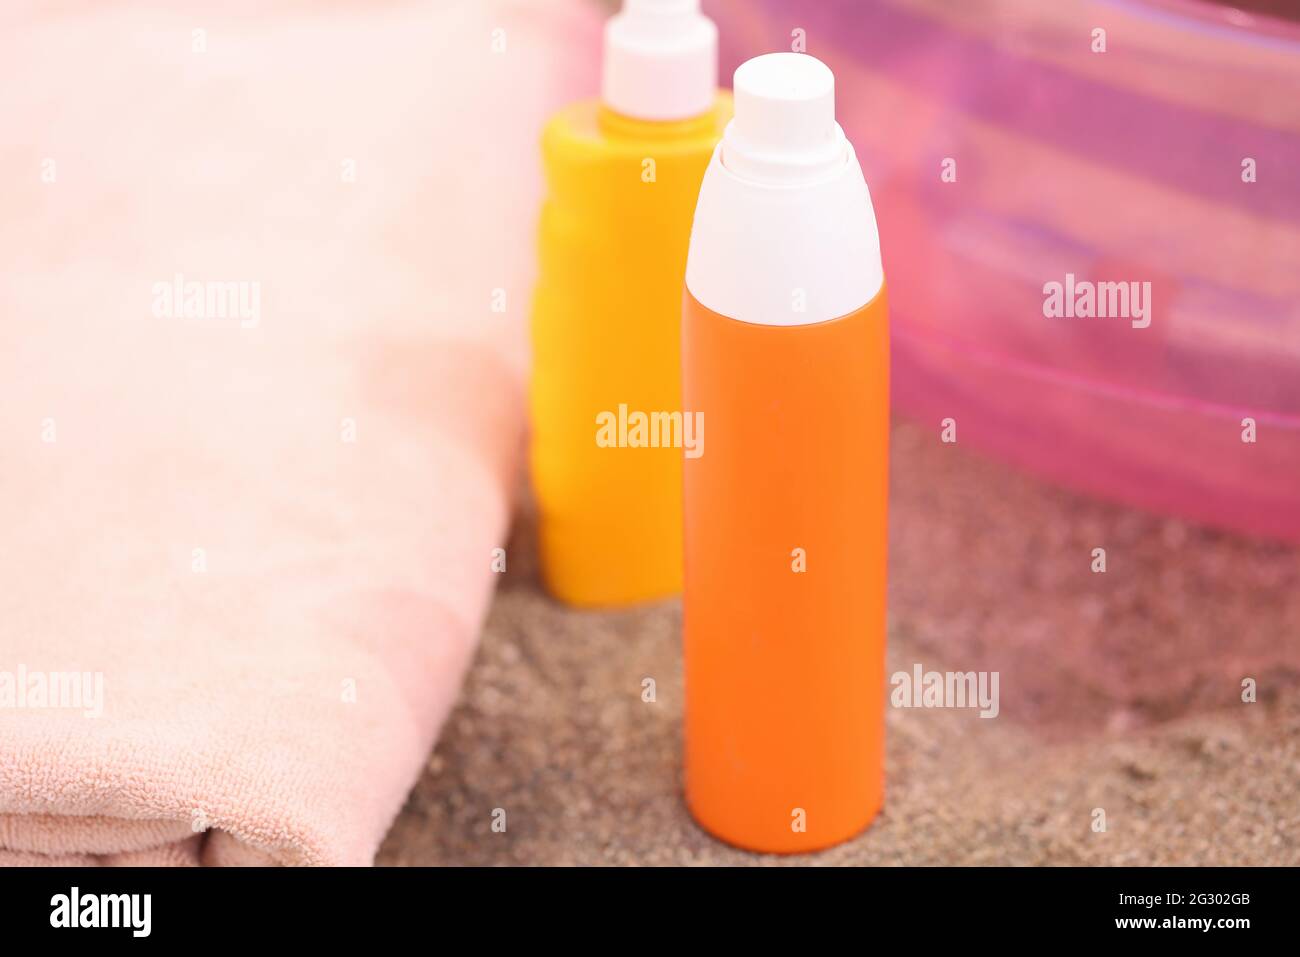 Two bottles of sunscreen stand on sand on beach Stock Photo